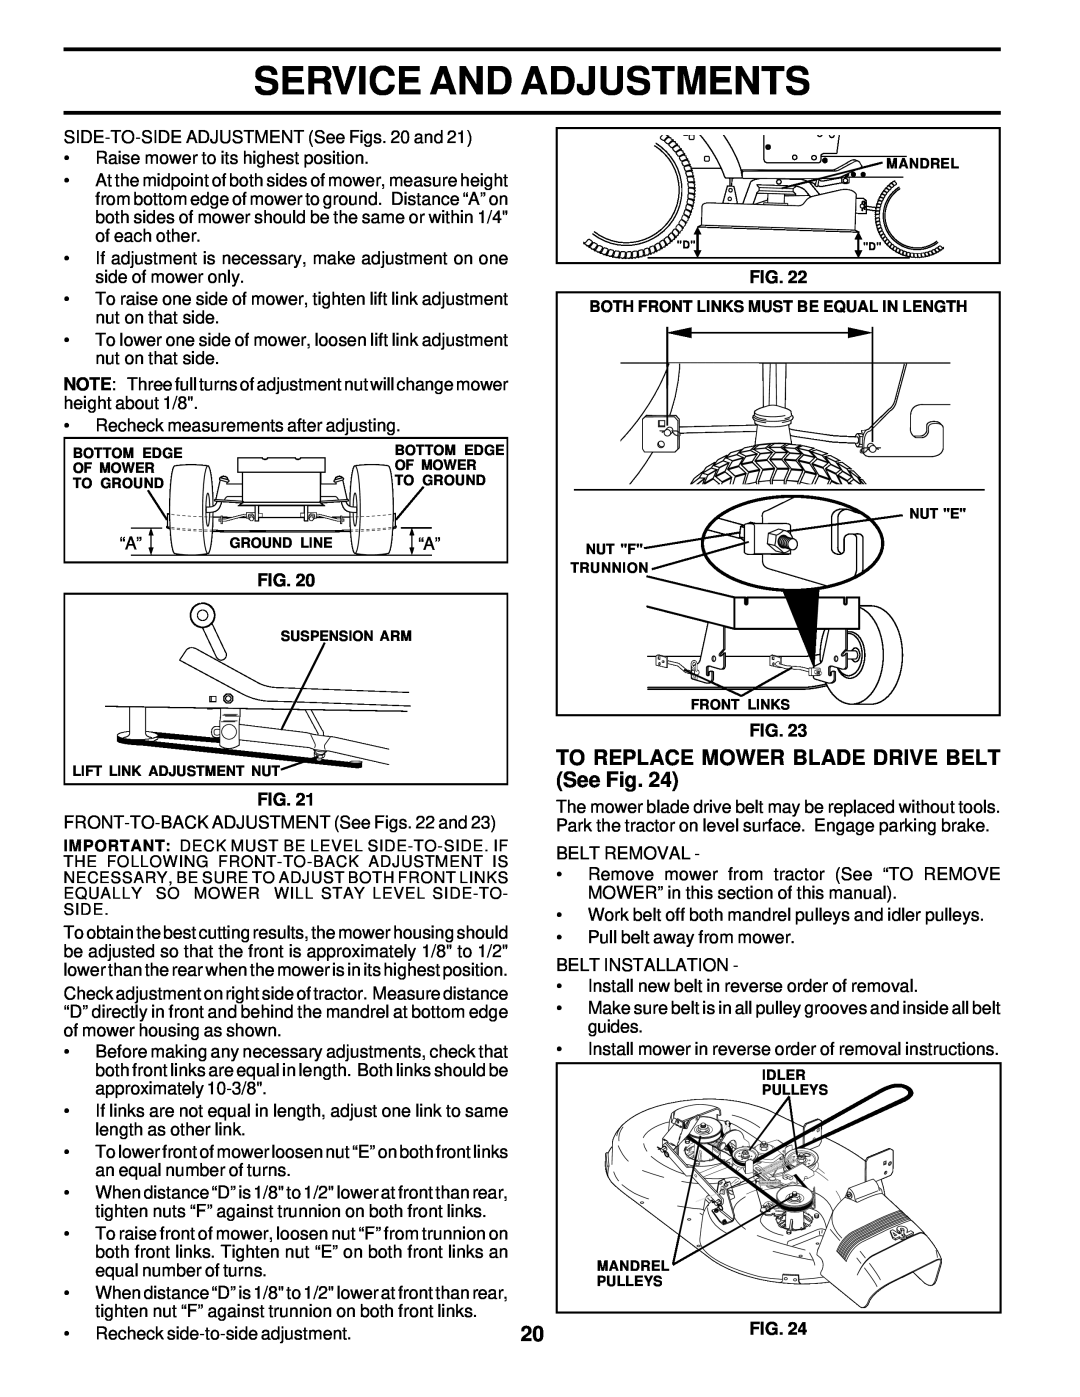 Poulan 177029 owner manual TO REPLACE MOWER BLADE DRIVE BELT See Fig, Service And Adjustments 